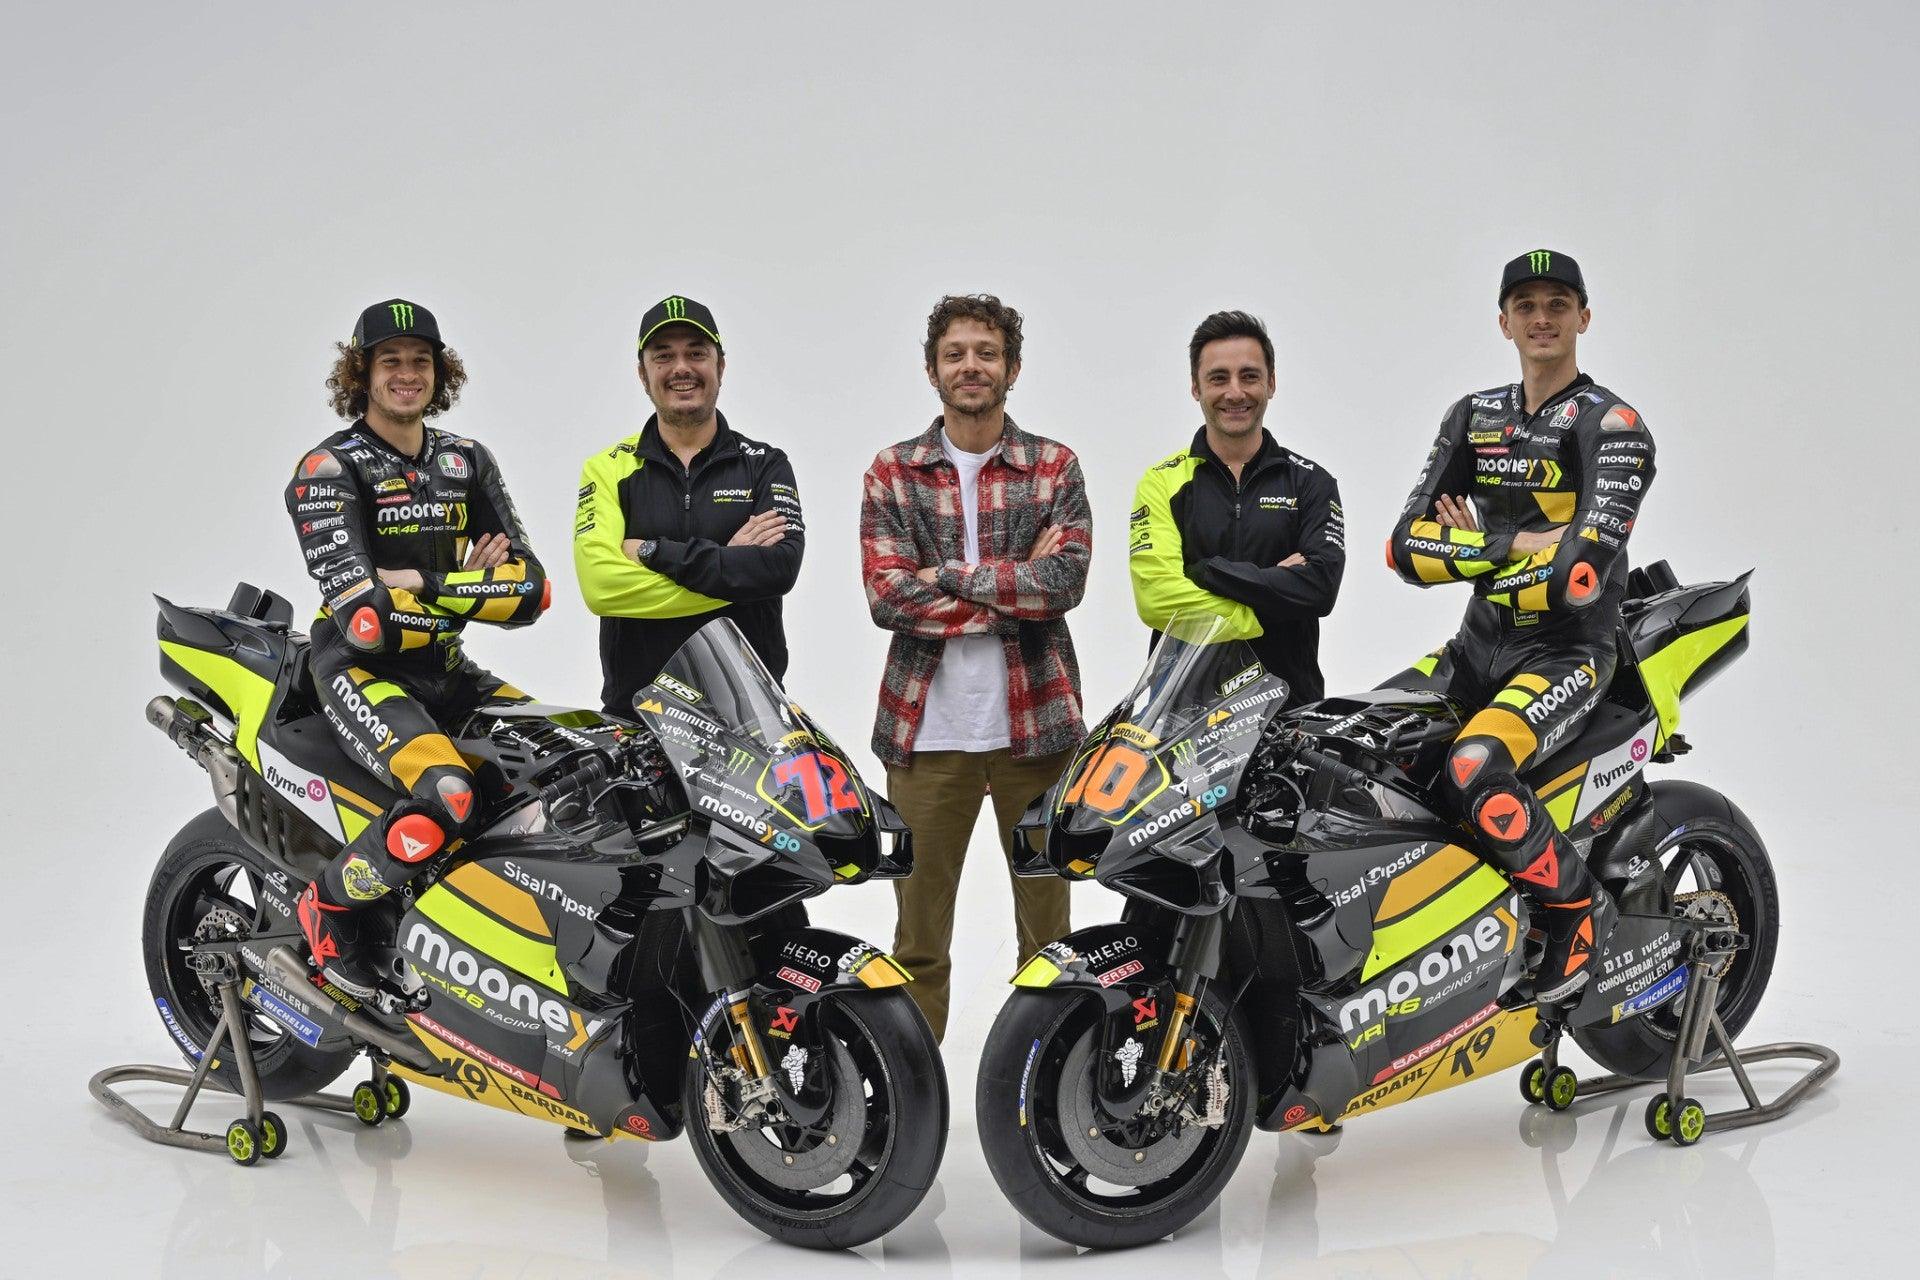 The official VR46 Racing Team colours for this year - MotoProWorks